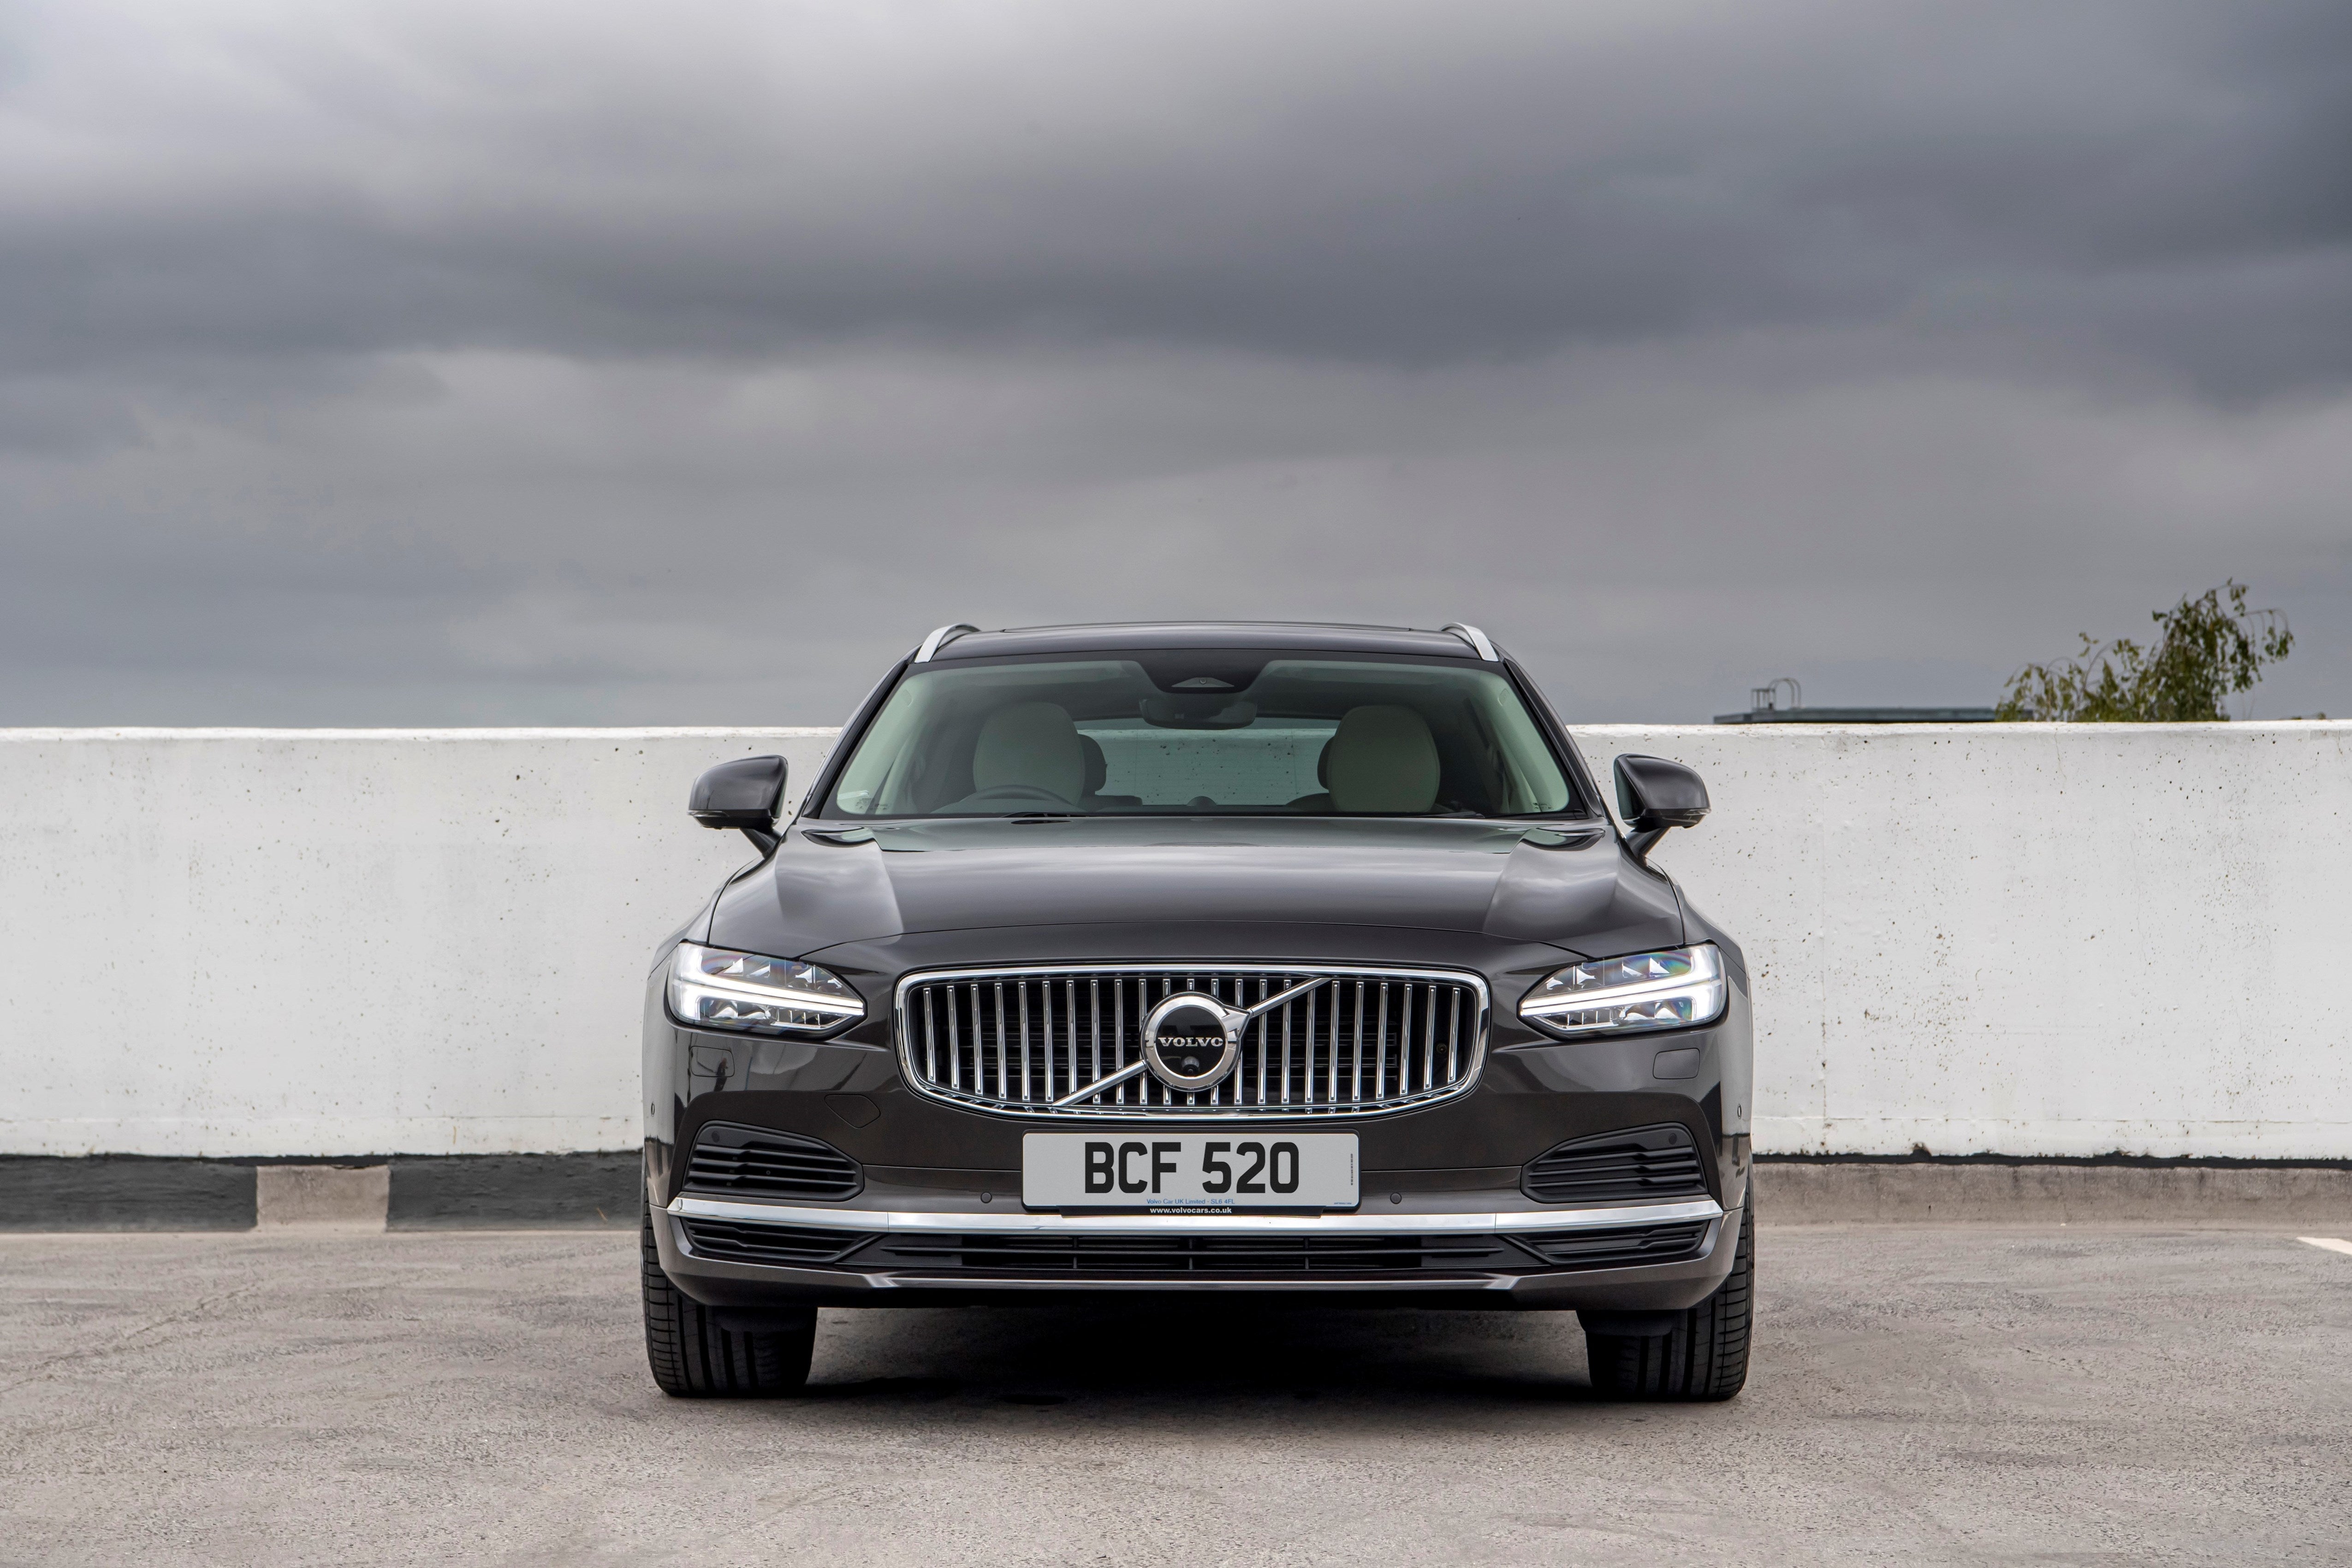 The grille has the famous Volvo insignia but is more highly styled than its shovel-nosed predecessors